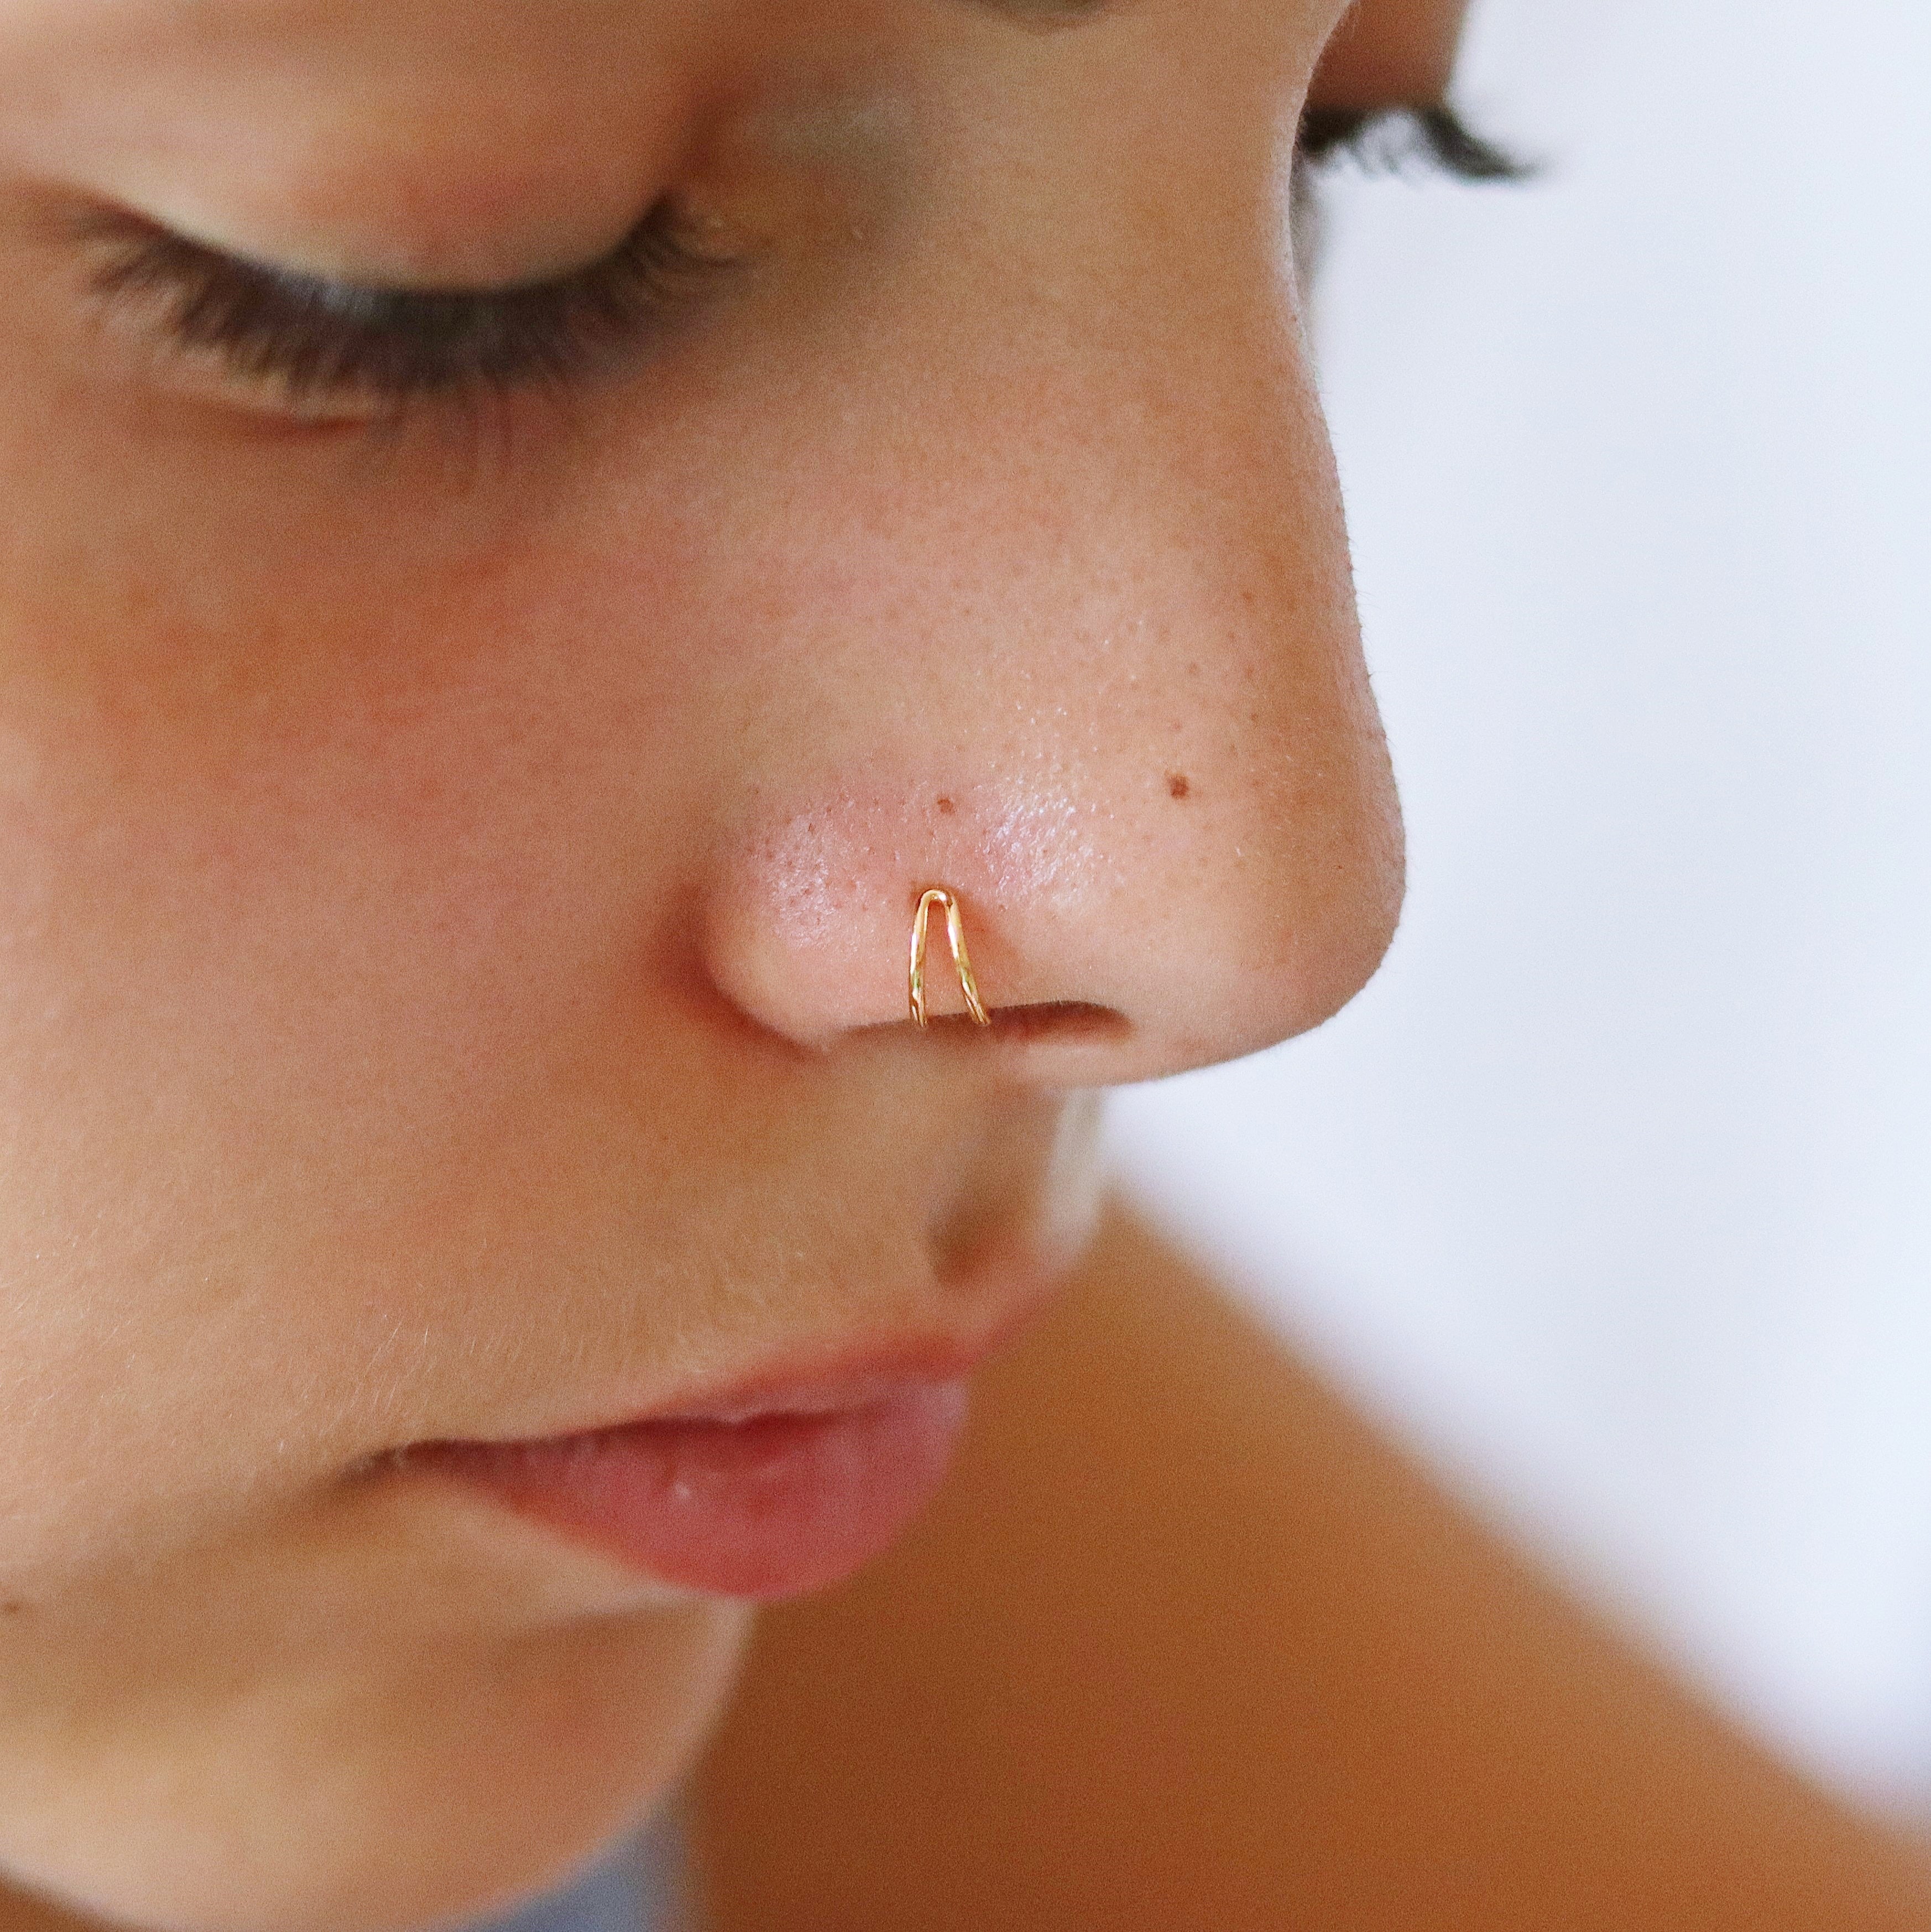 7 month old nostril piercing, 20g-unsure of exact metal, it was placed by  the piercer. I've been dealing with bumps for 5 months-do I change the  jewelry? More info in comment. :